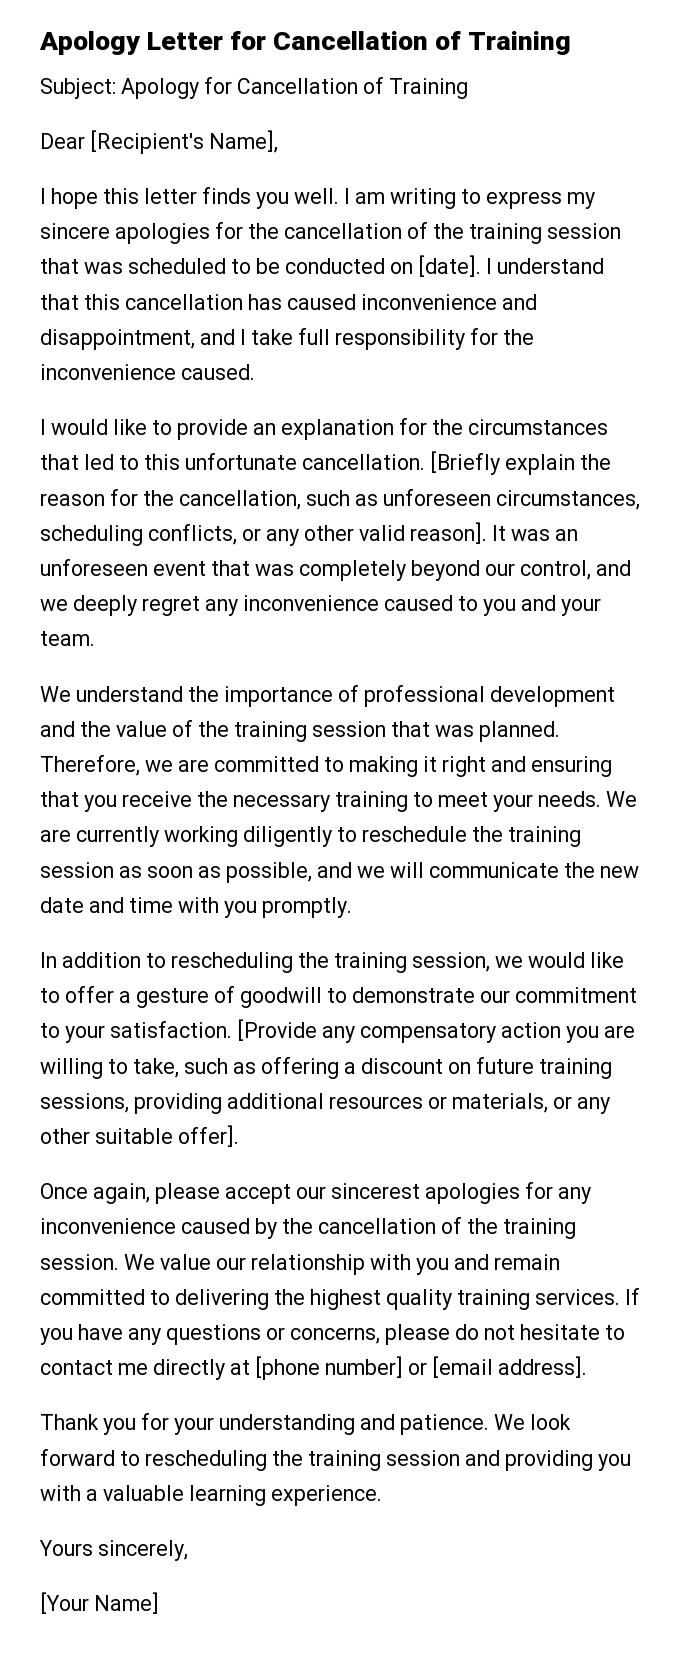 Apology Letter for Cancellation of Training